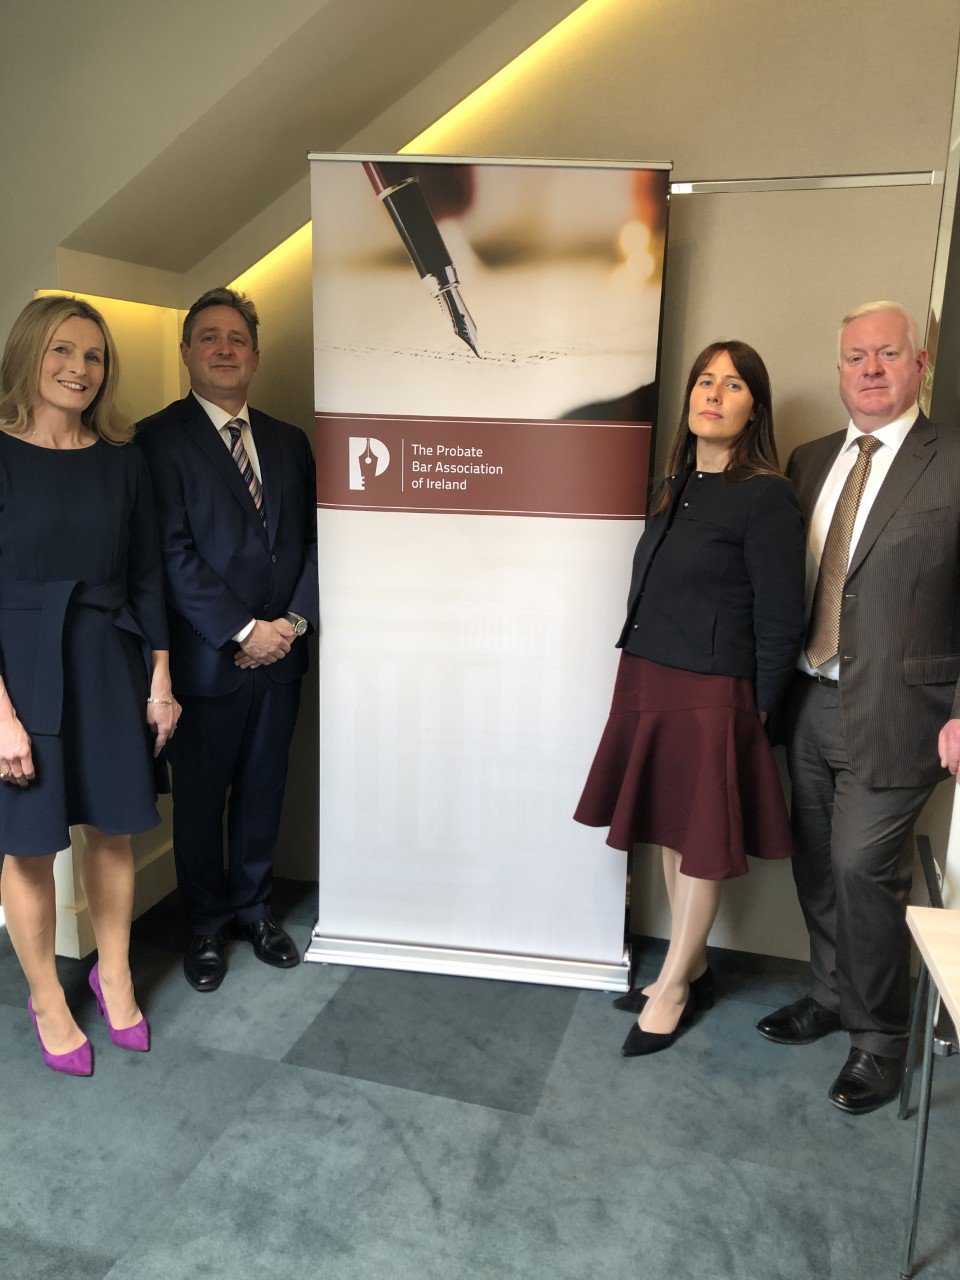 In pictures: Launch of the new Probate Bar Association of Ireland